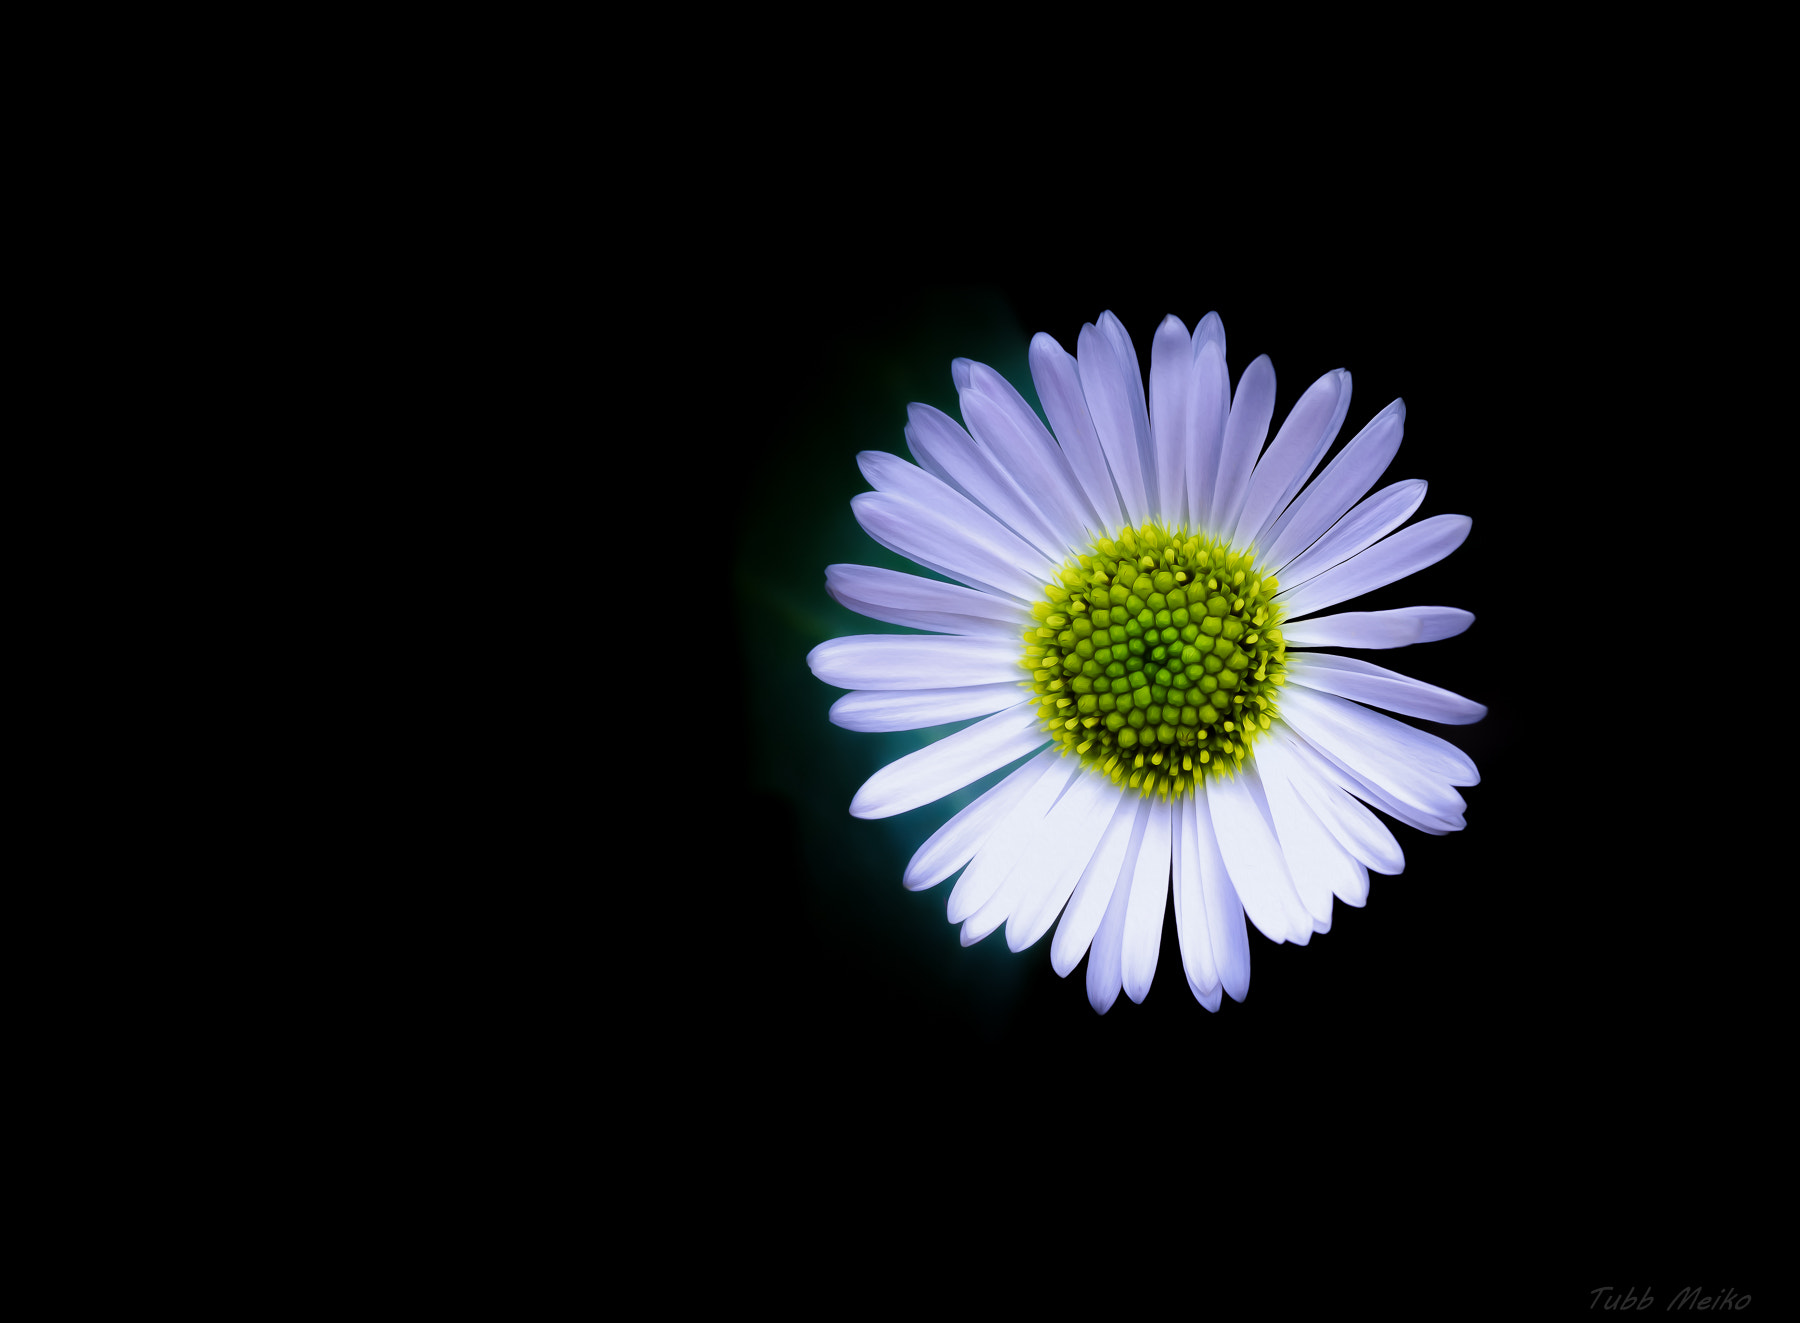 Olympus OM-D E-M10 II sample photo. Only a daisy photography